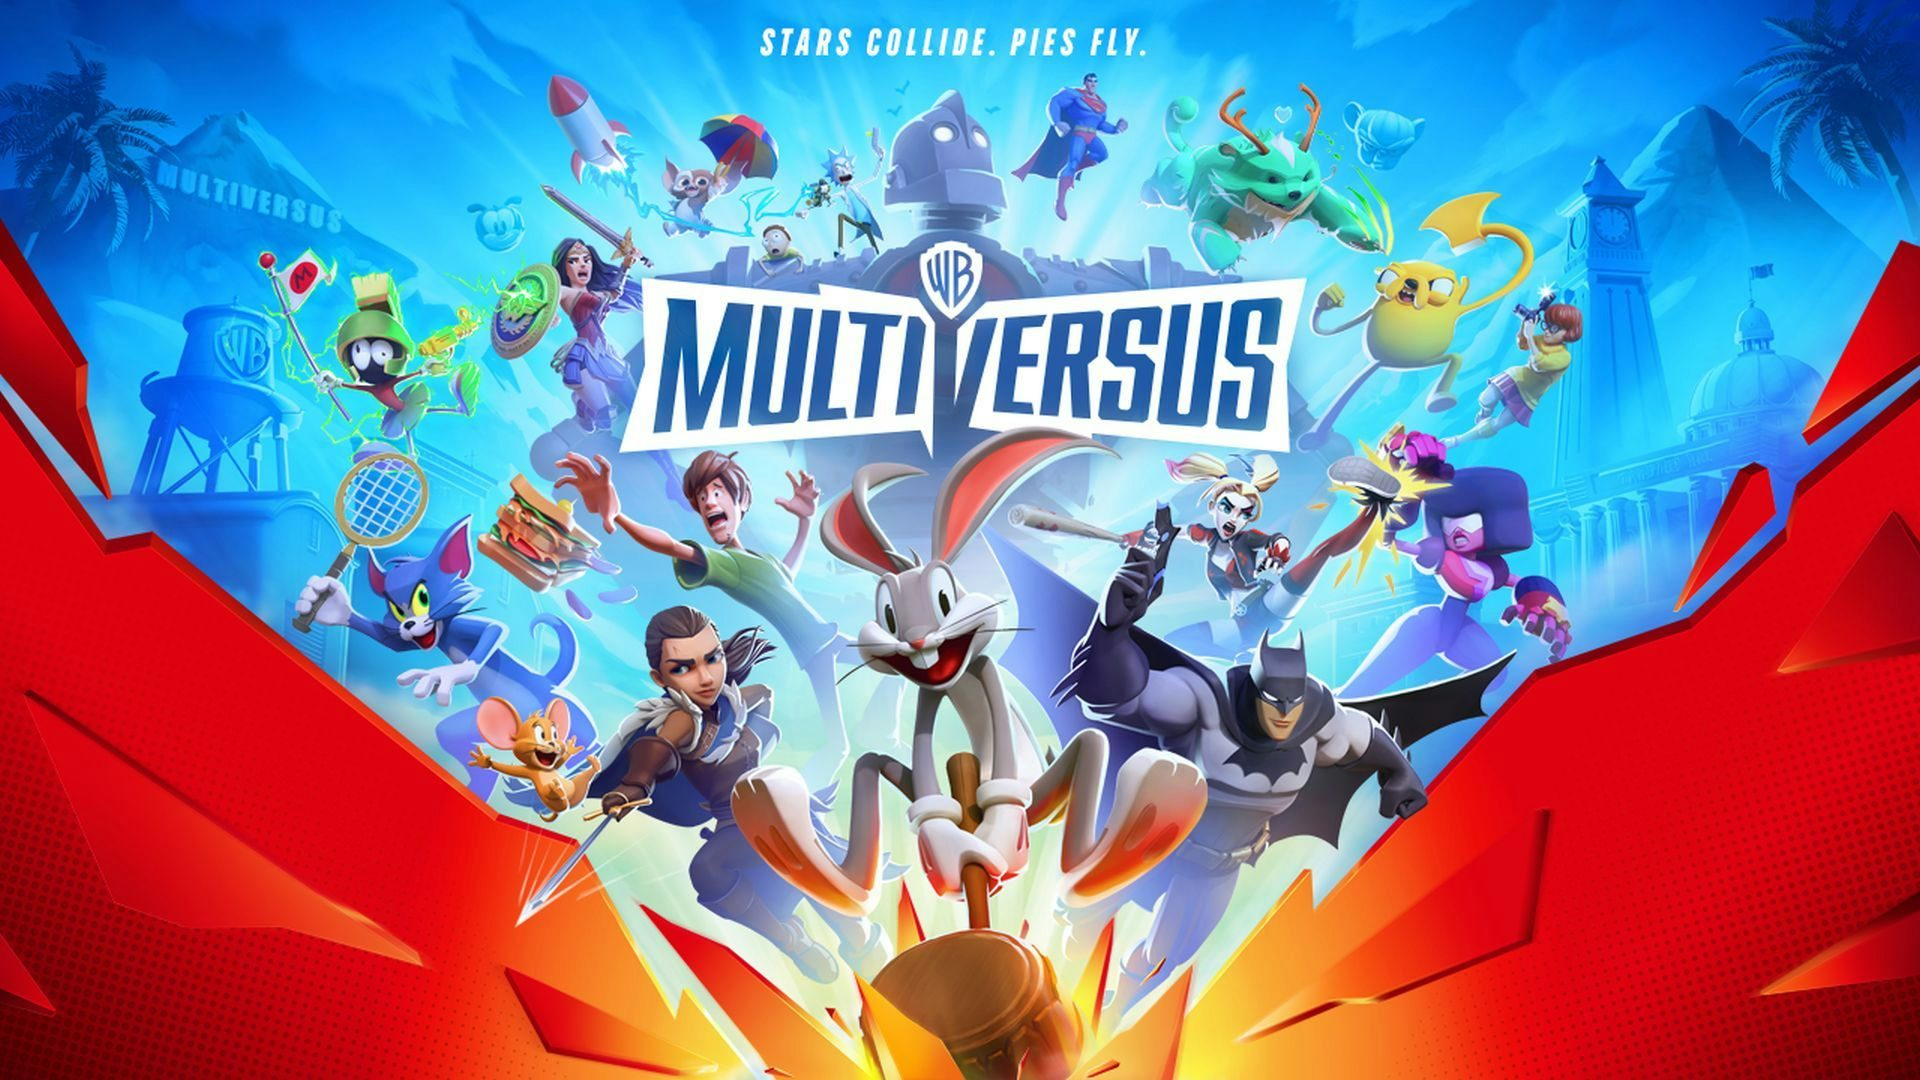 Make an action montage from your best fights in MultiVersus!